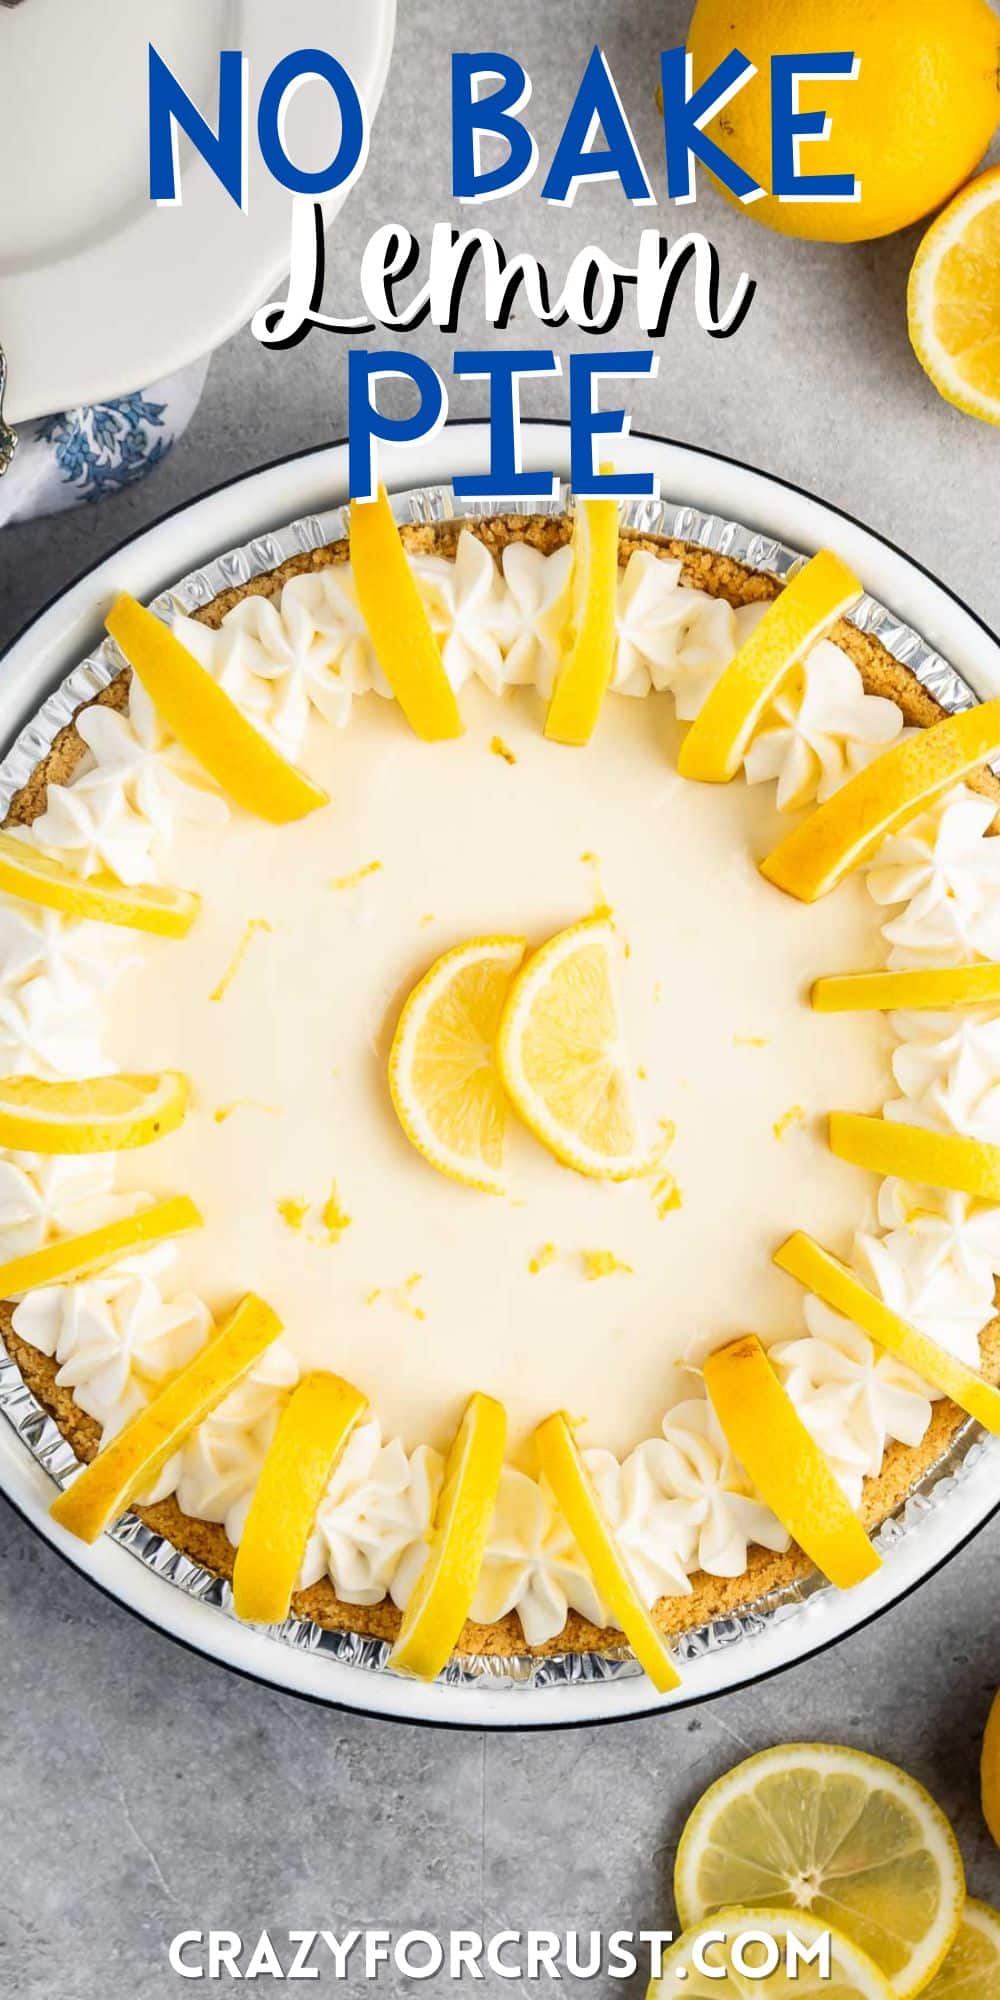 two photos of lemon pie in a tin with sliced lemons on top with words on the image.